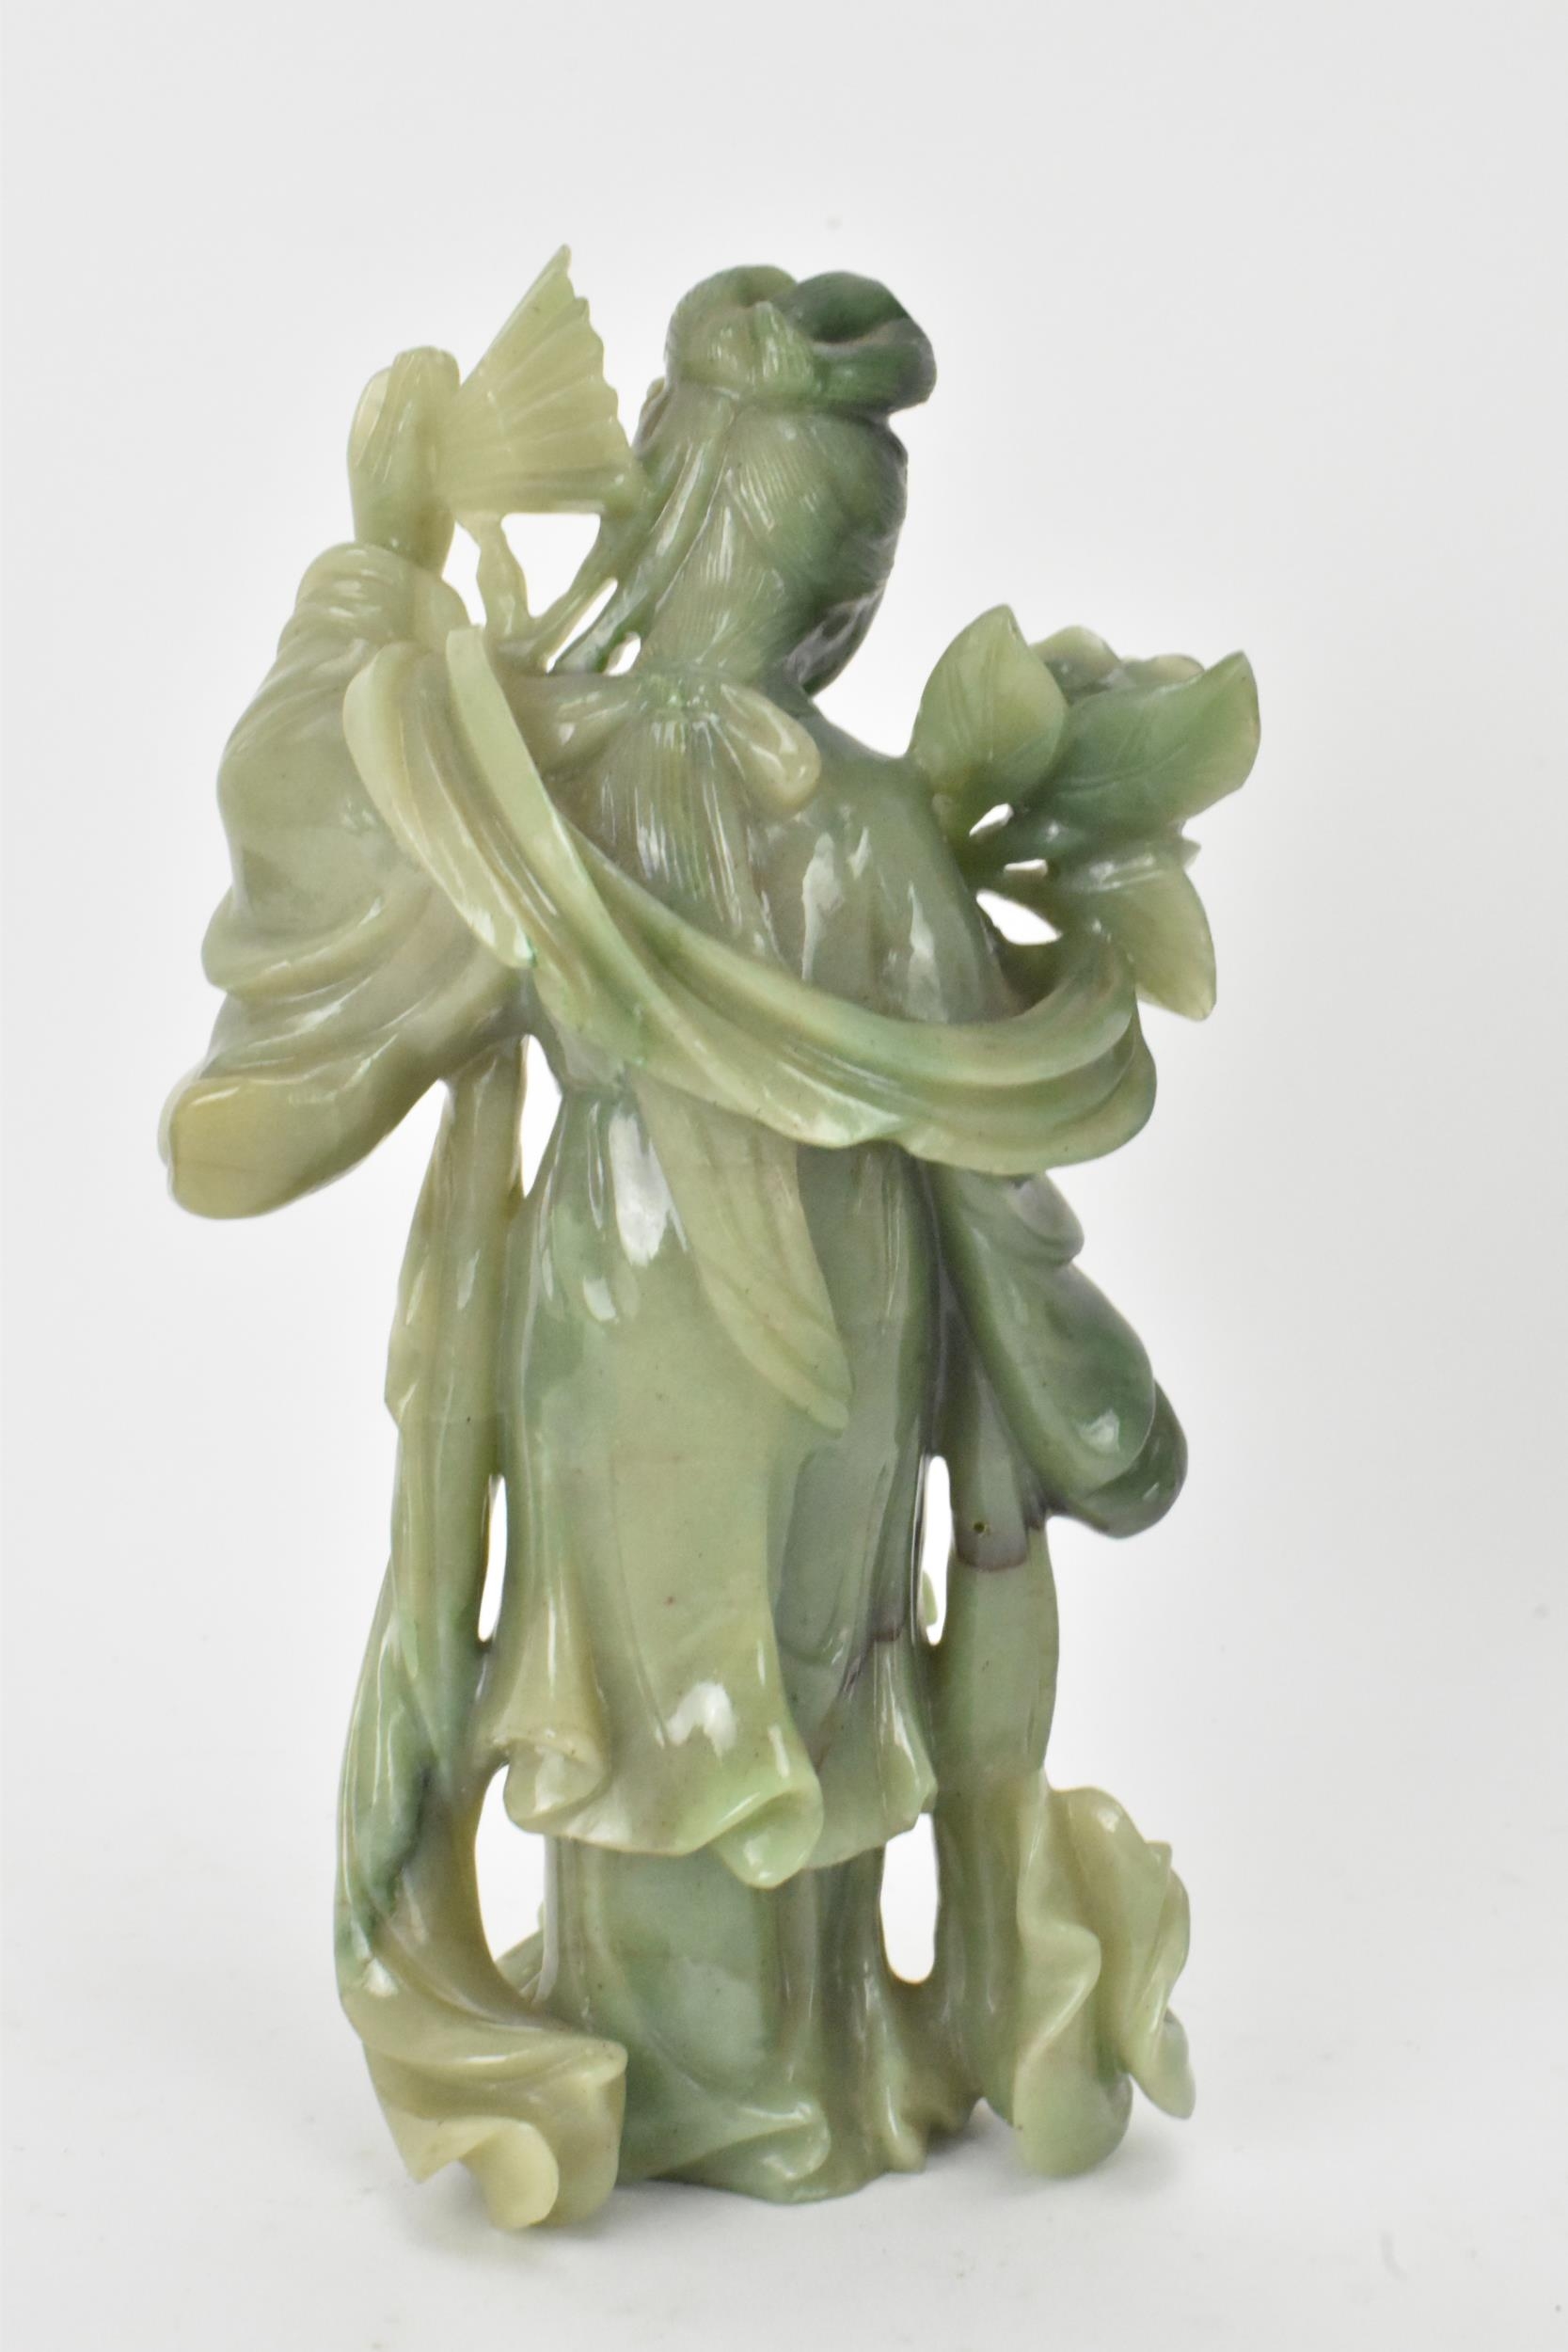 Two Chinese 20th century jadeite carved figures, the green example modeled holding a fan and flowers - Image 6 of 7